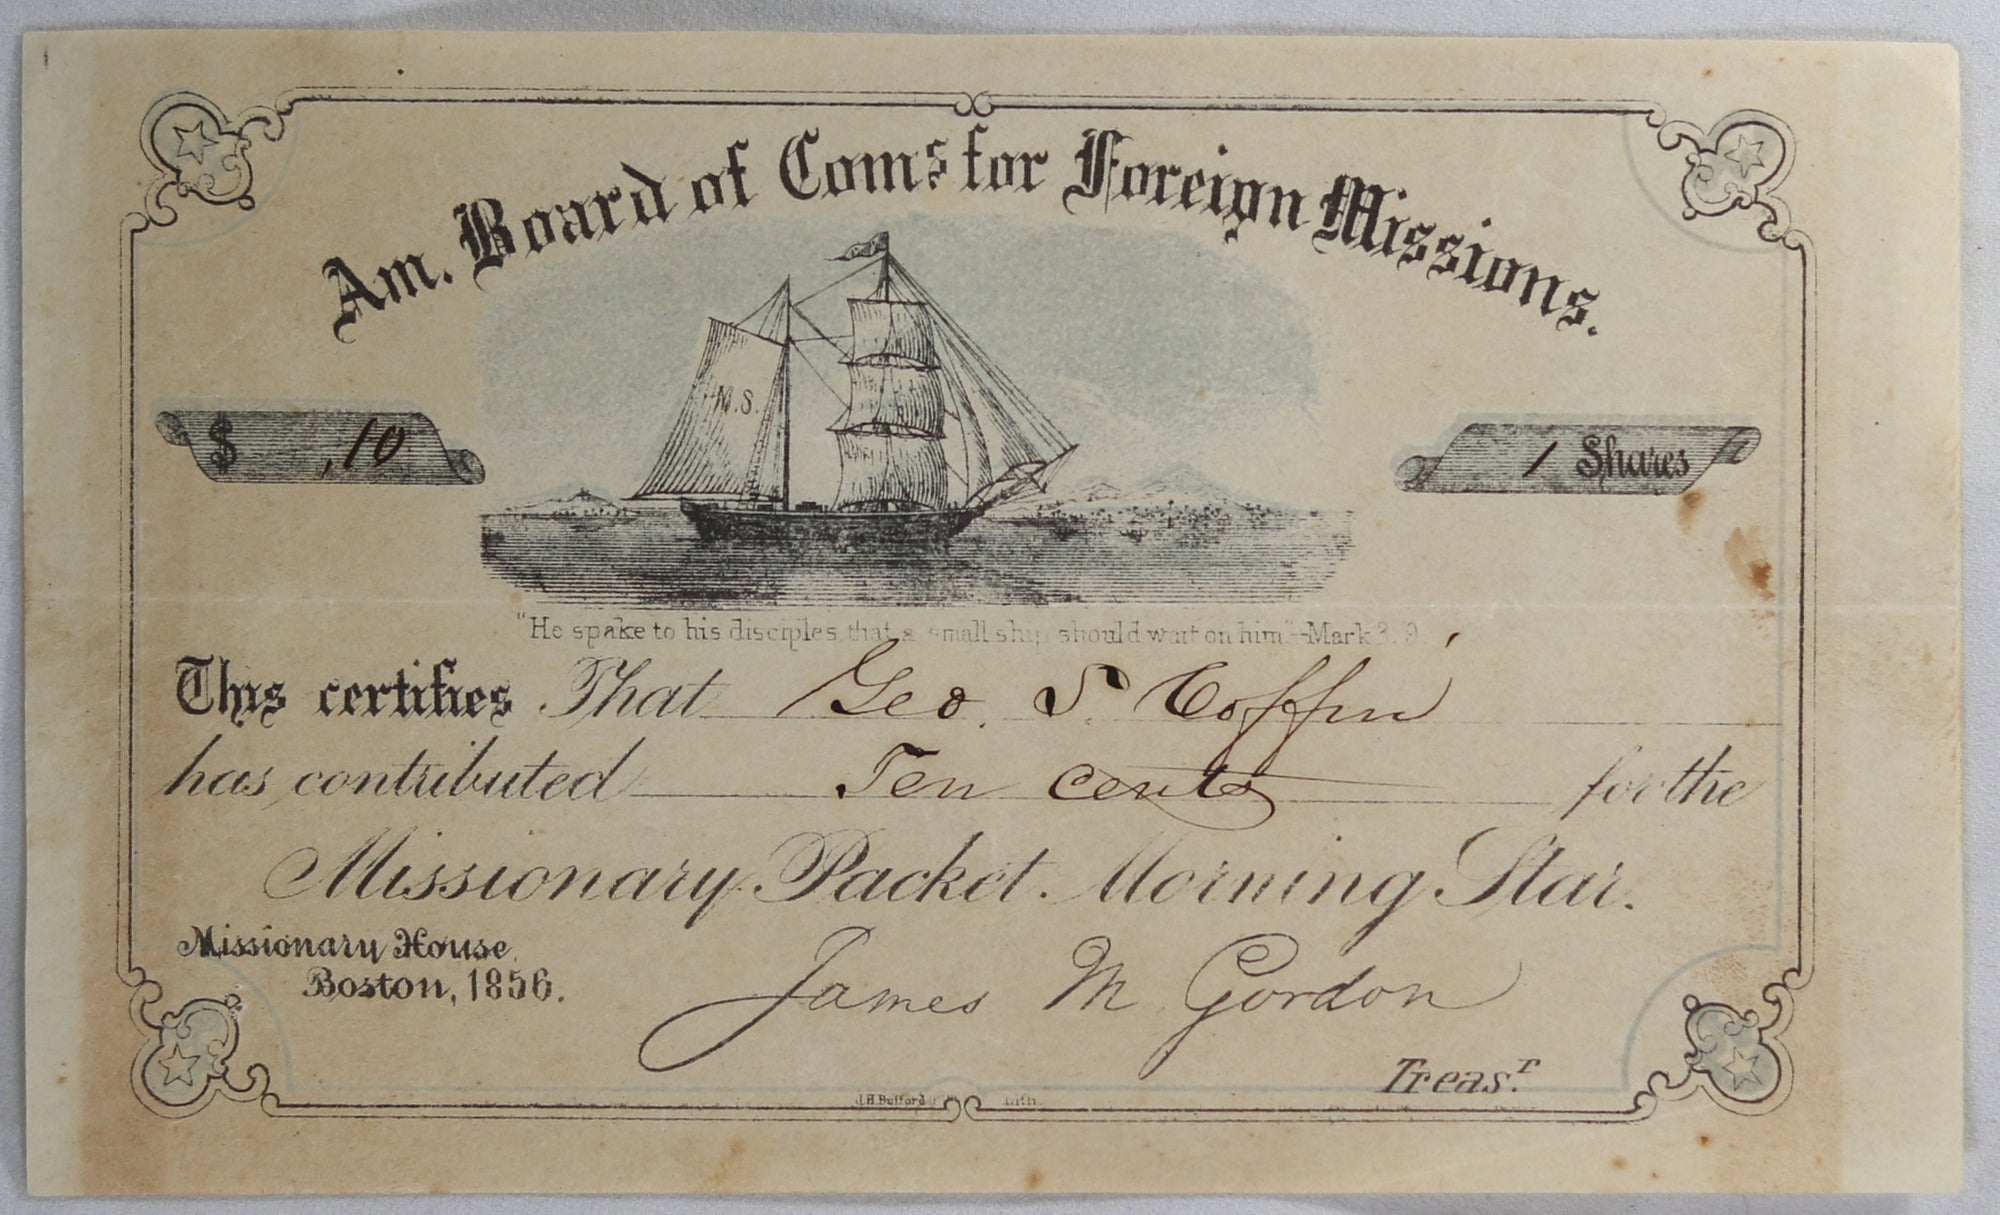 1856 share certificate for American Board of Commissions for Foreign Missions